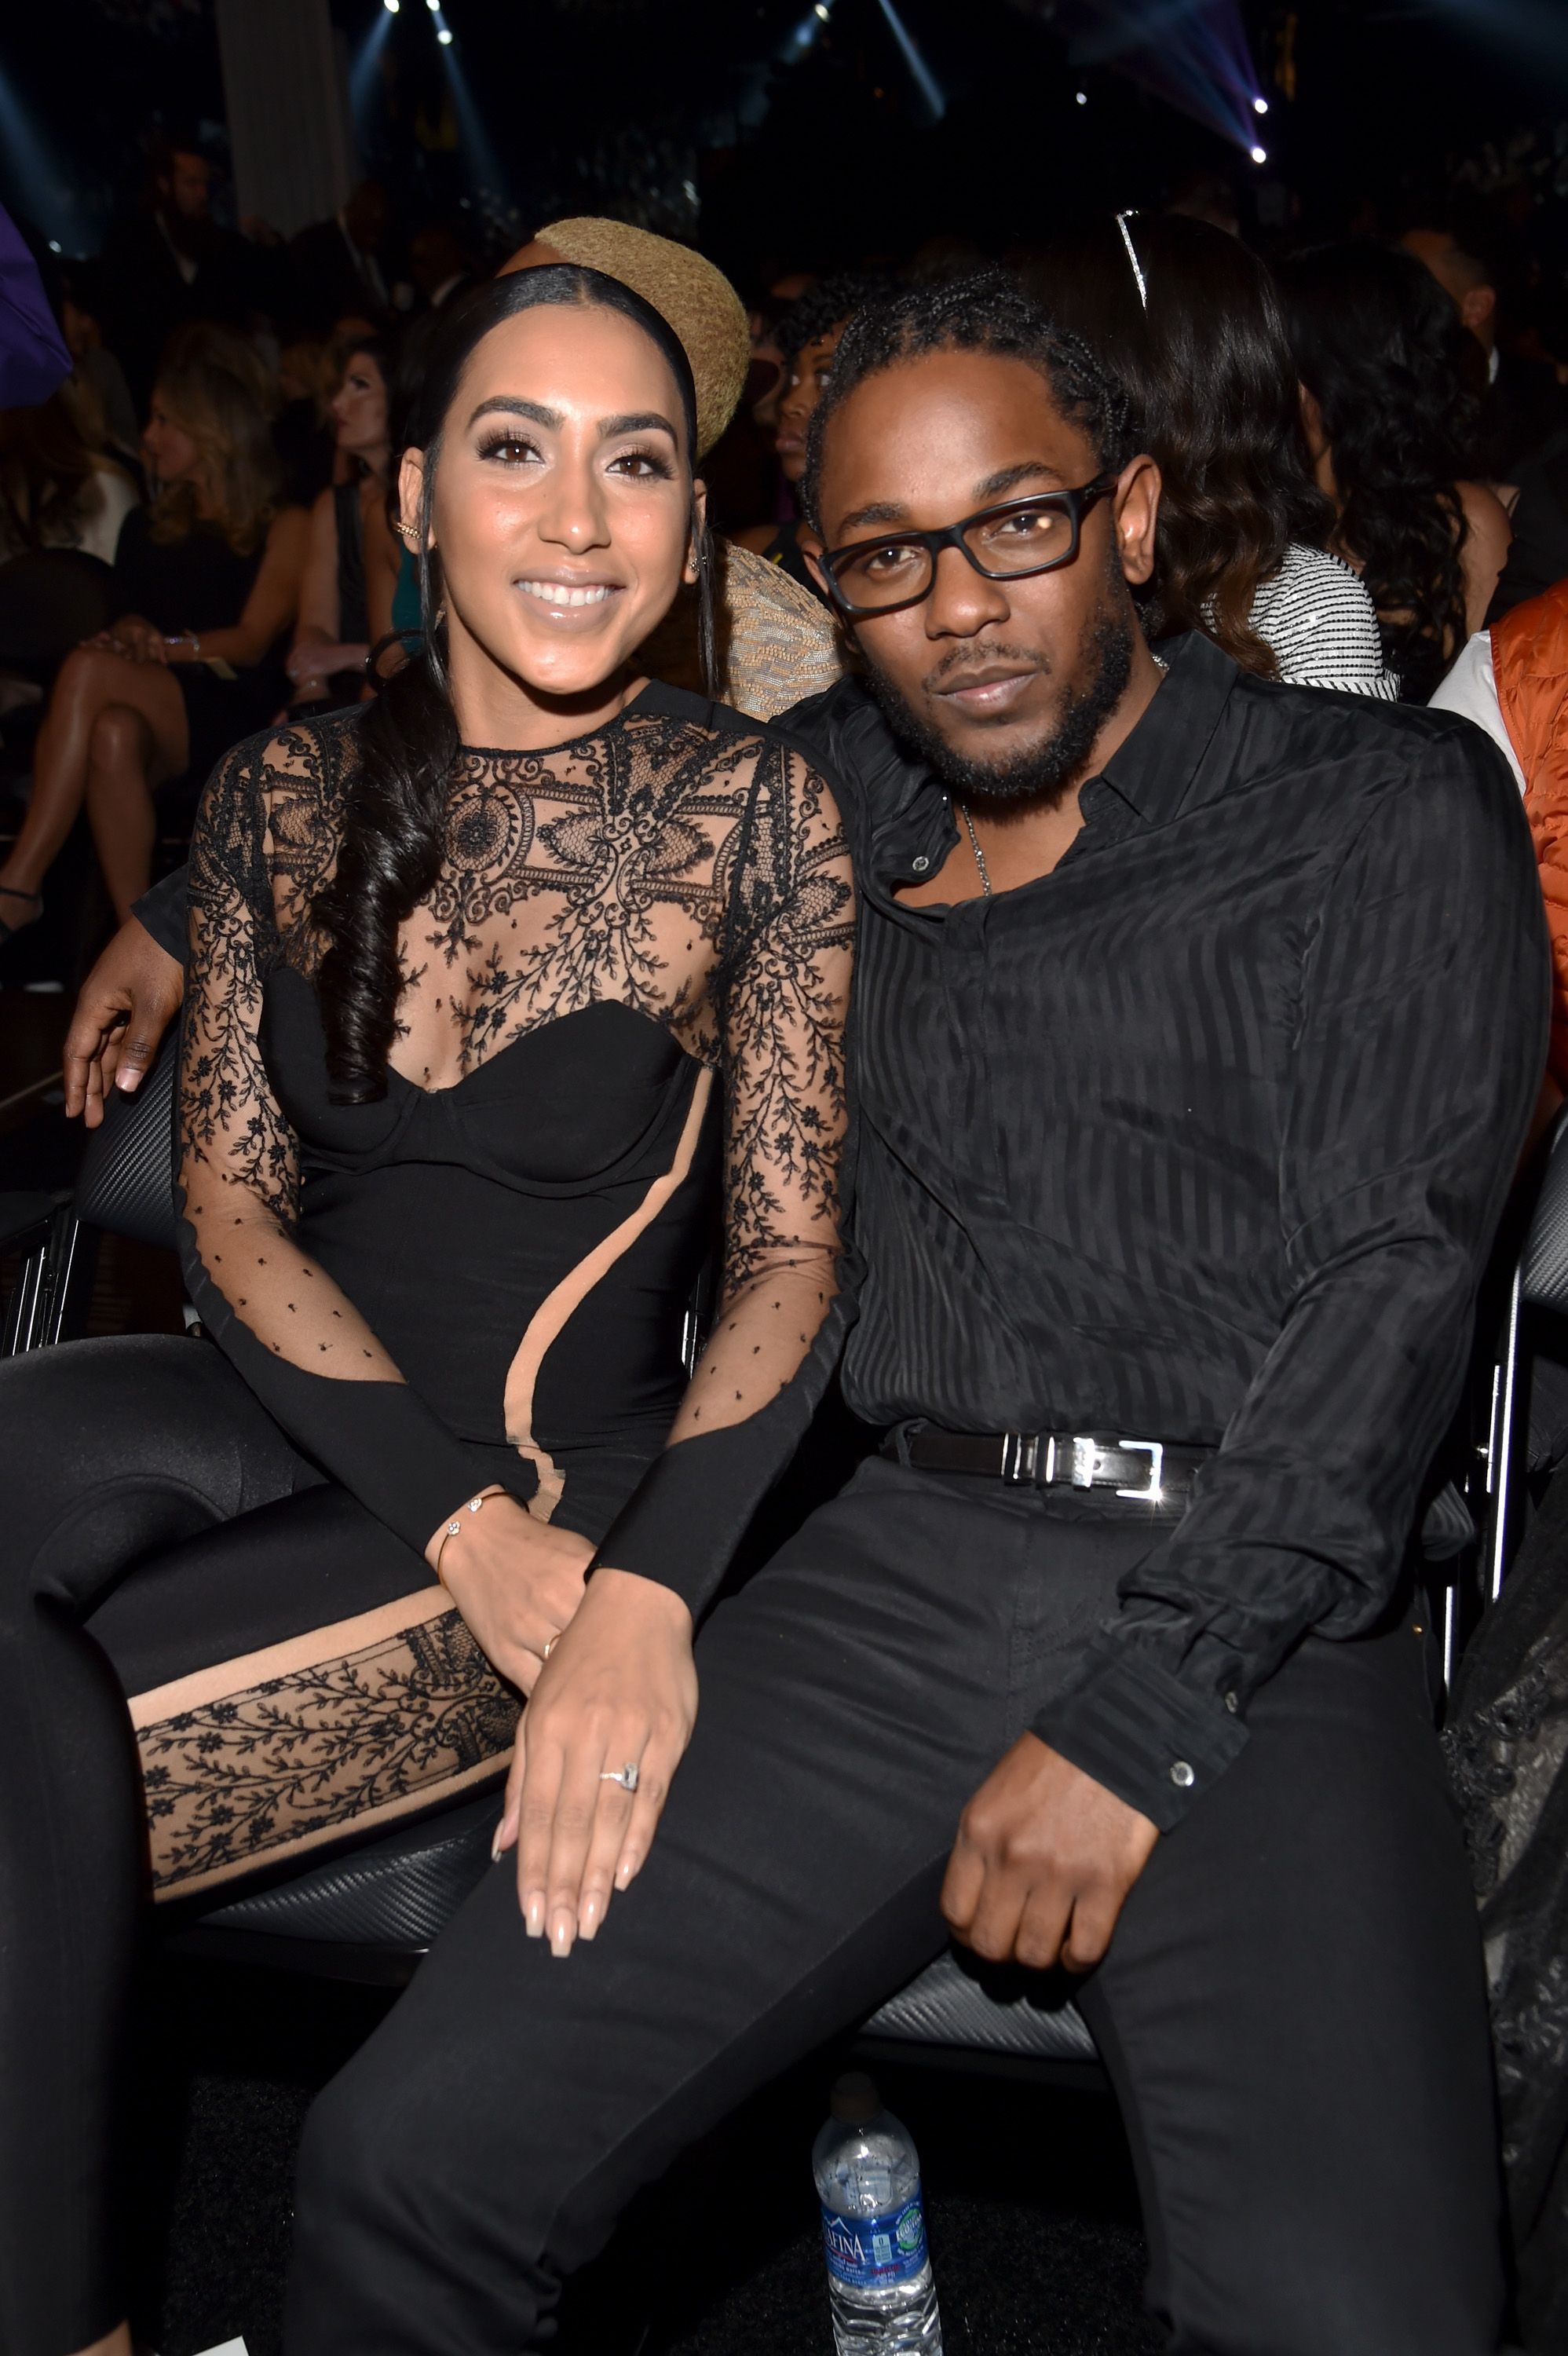 Kendrick Lamar and Whitney Alford attend the 58th Grammy Awards at Staples Center on February 15, 2016 in Los Angeles, California. | Photo: Getty Images